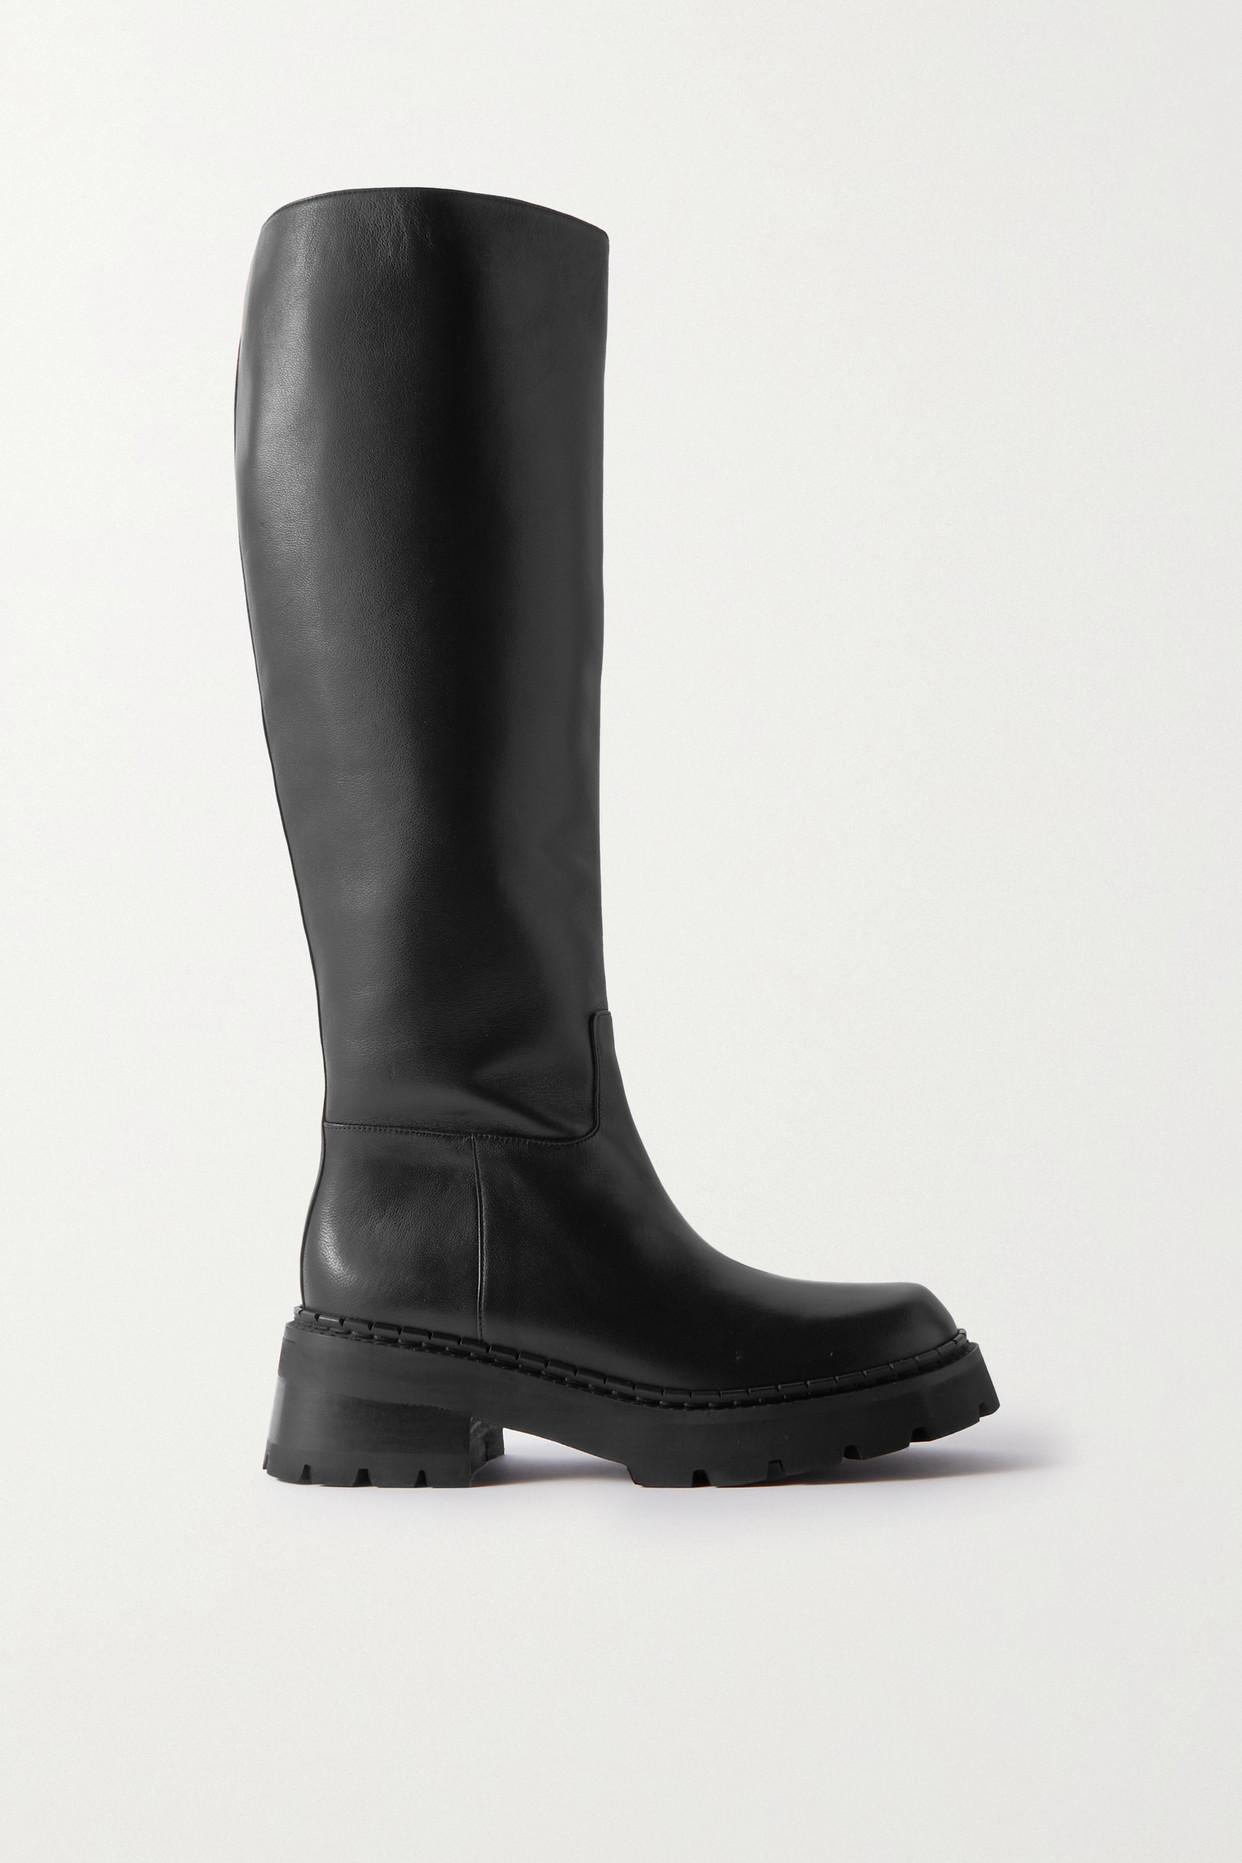 BY FAR Russel Leather Knee Boots in Black | Lyst